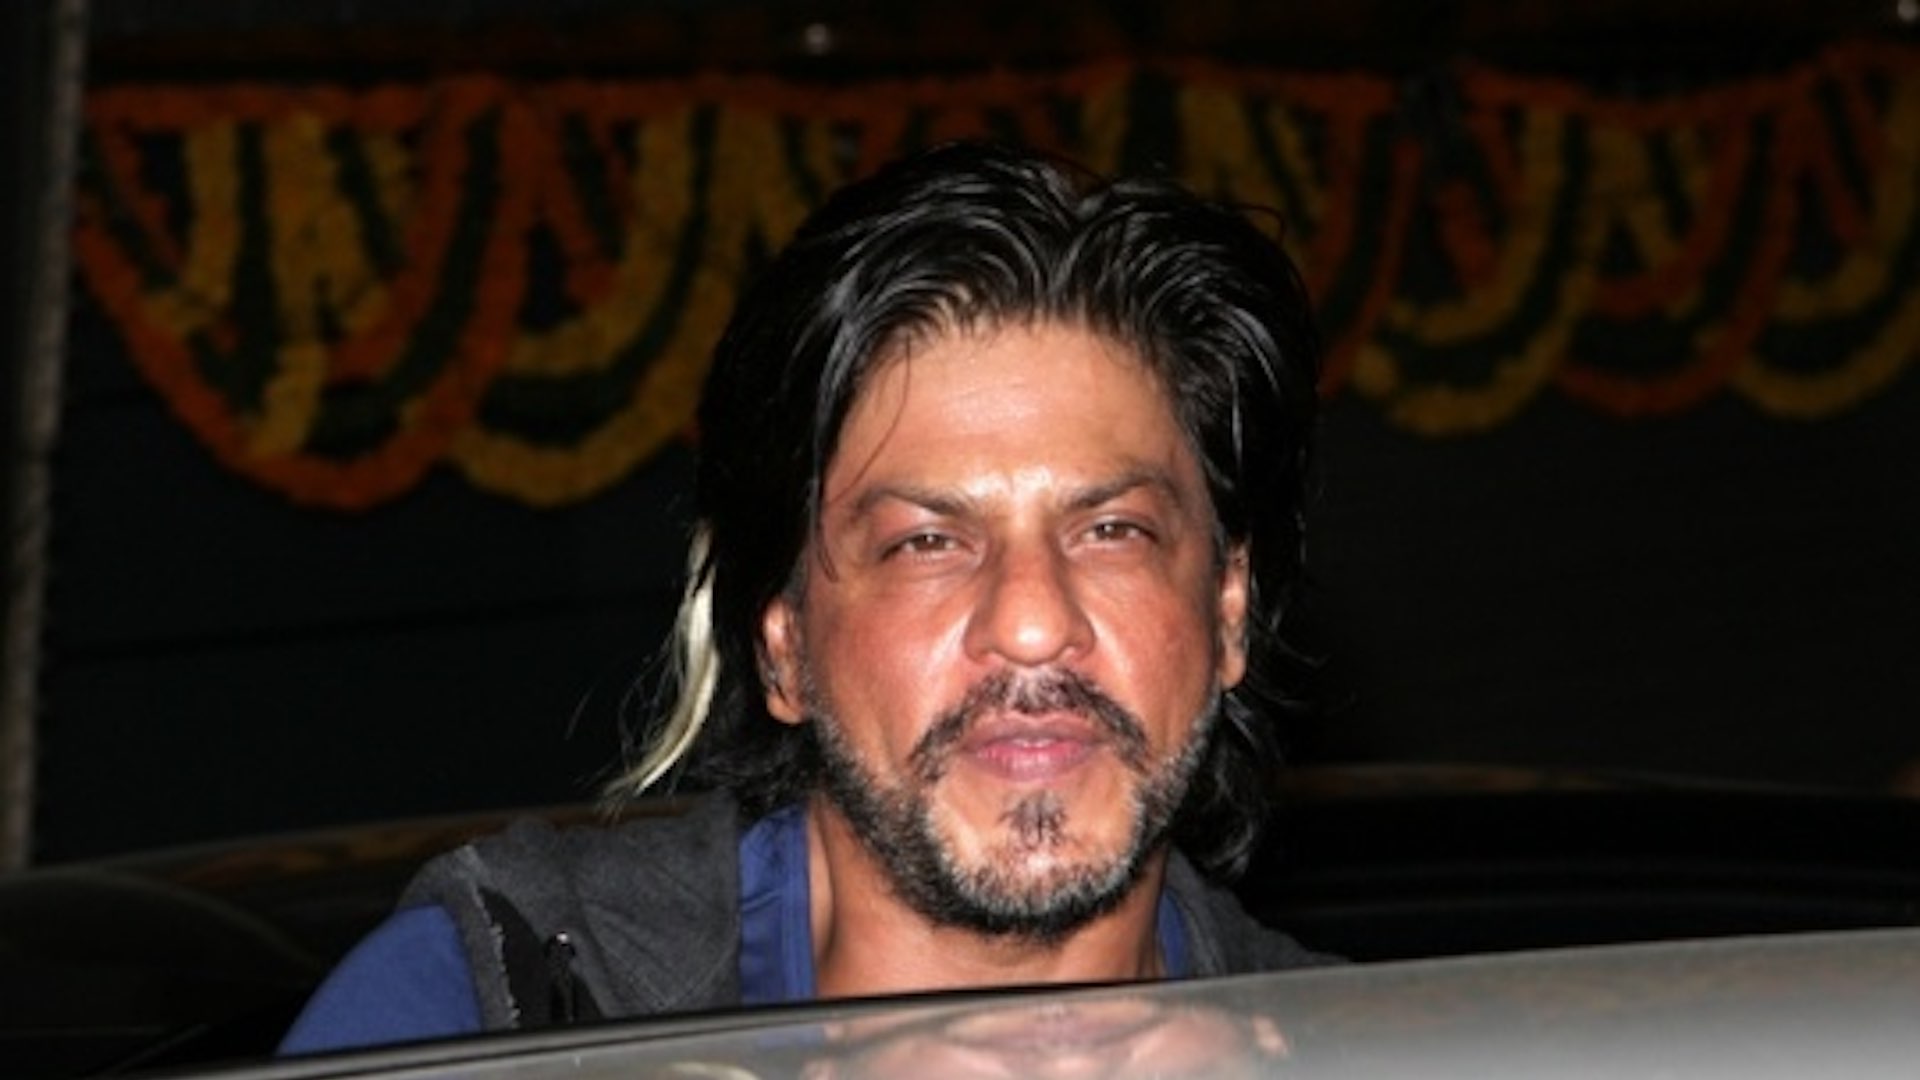 Shah Rukh Khan accused of bribery in son's high-profile drug case